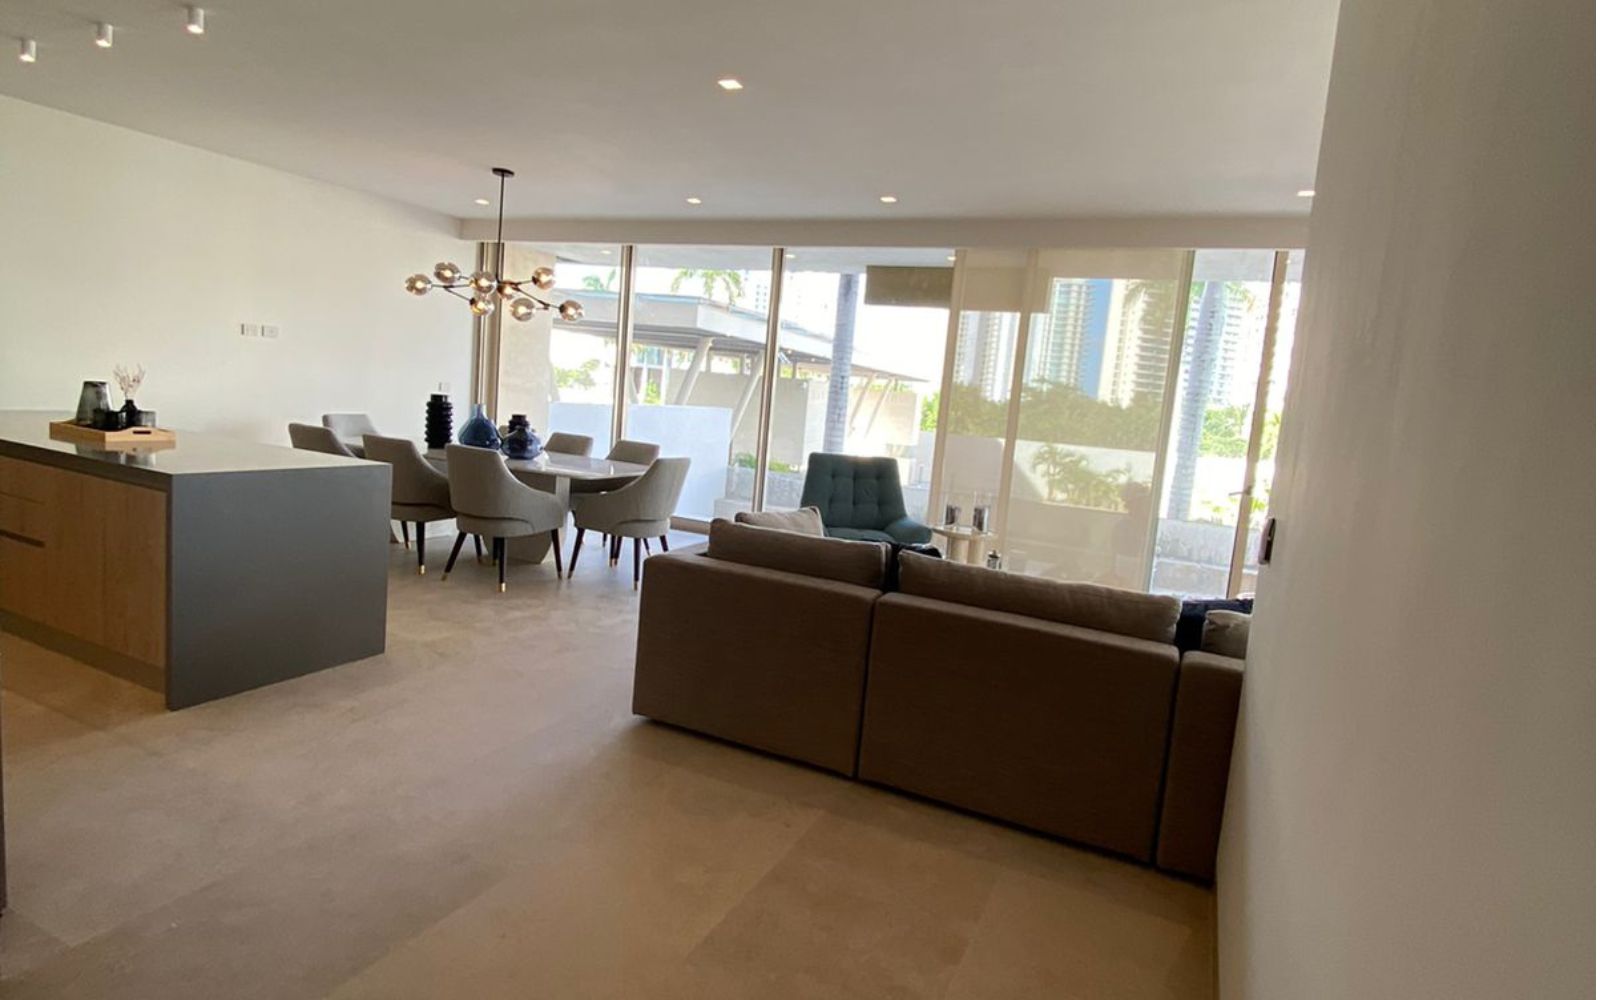 Apartment with beach club facing the sea, swimming pool, paddle tennis court and playroom in , Cancún.